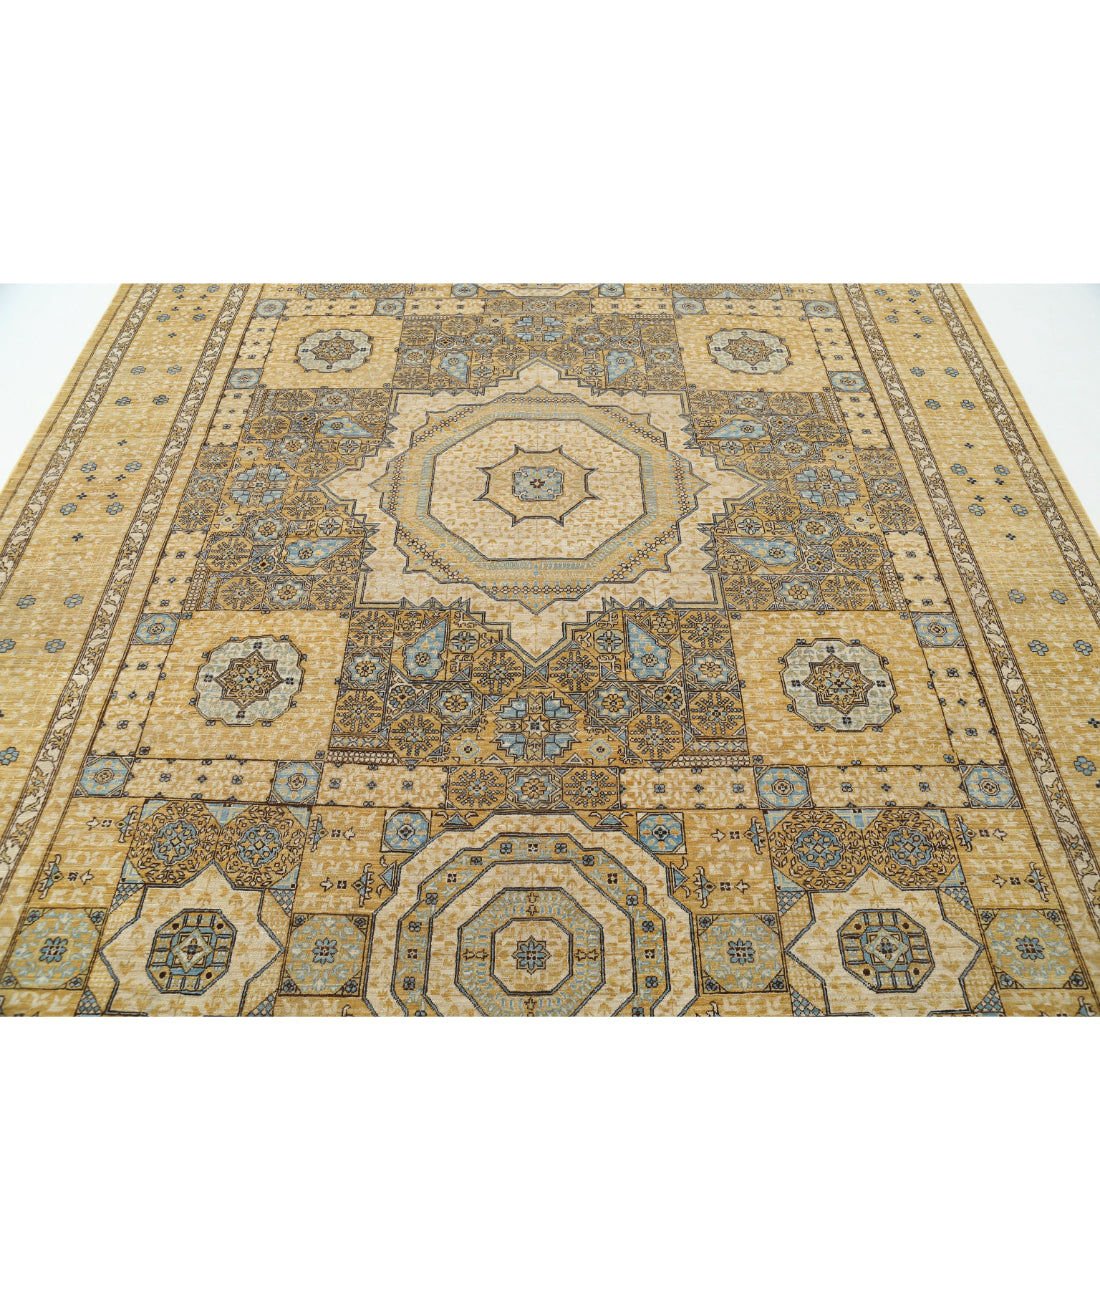 Hand Knotted Fine Mamluk Wool Rug - 7'10'' x 10'10'' 7'10'' x 10'10'' (235 X 325) / Gold / Ivory